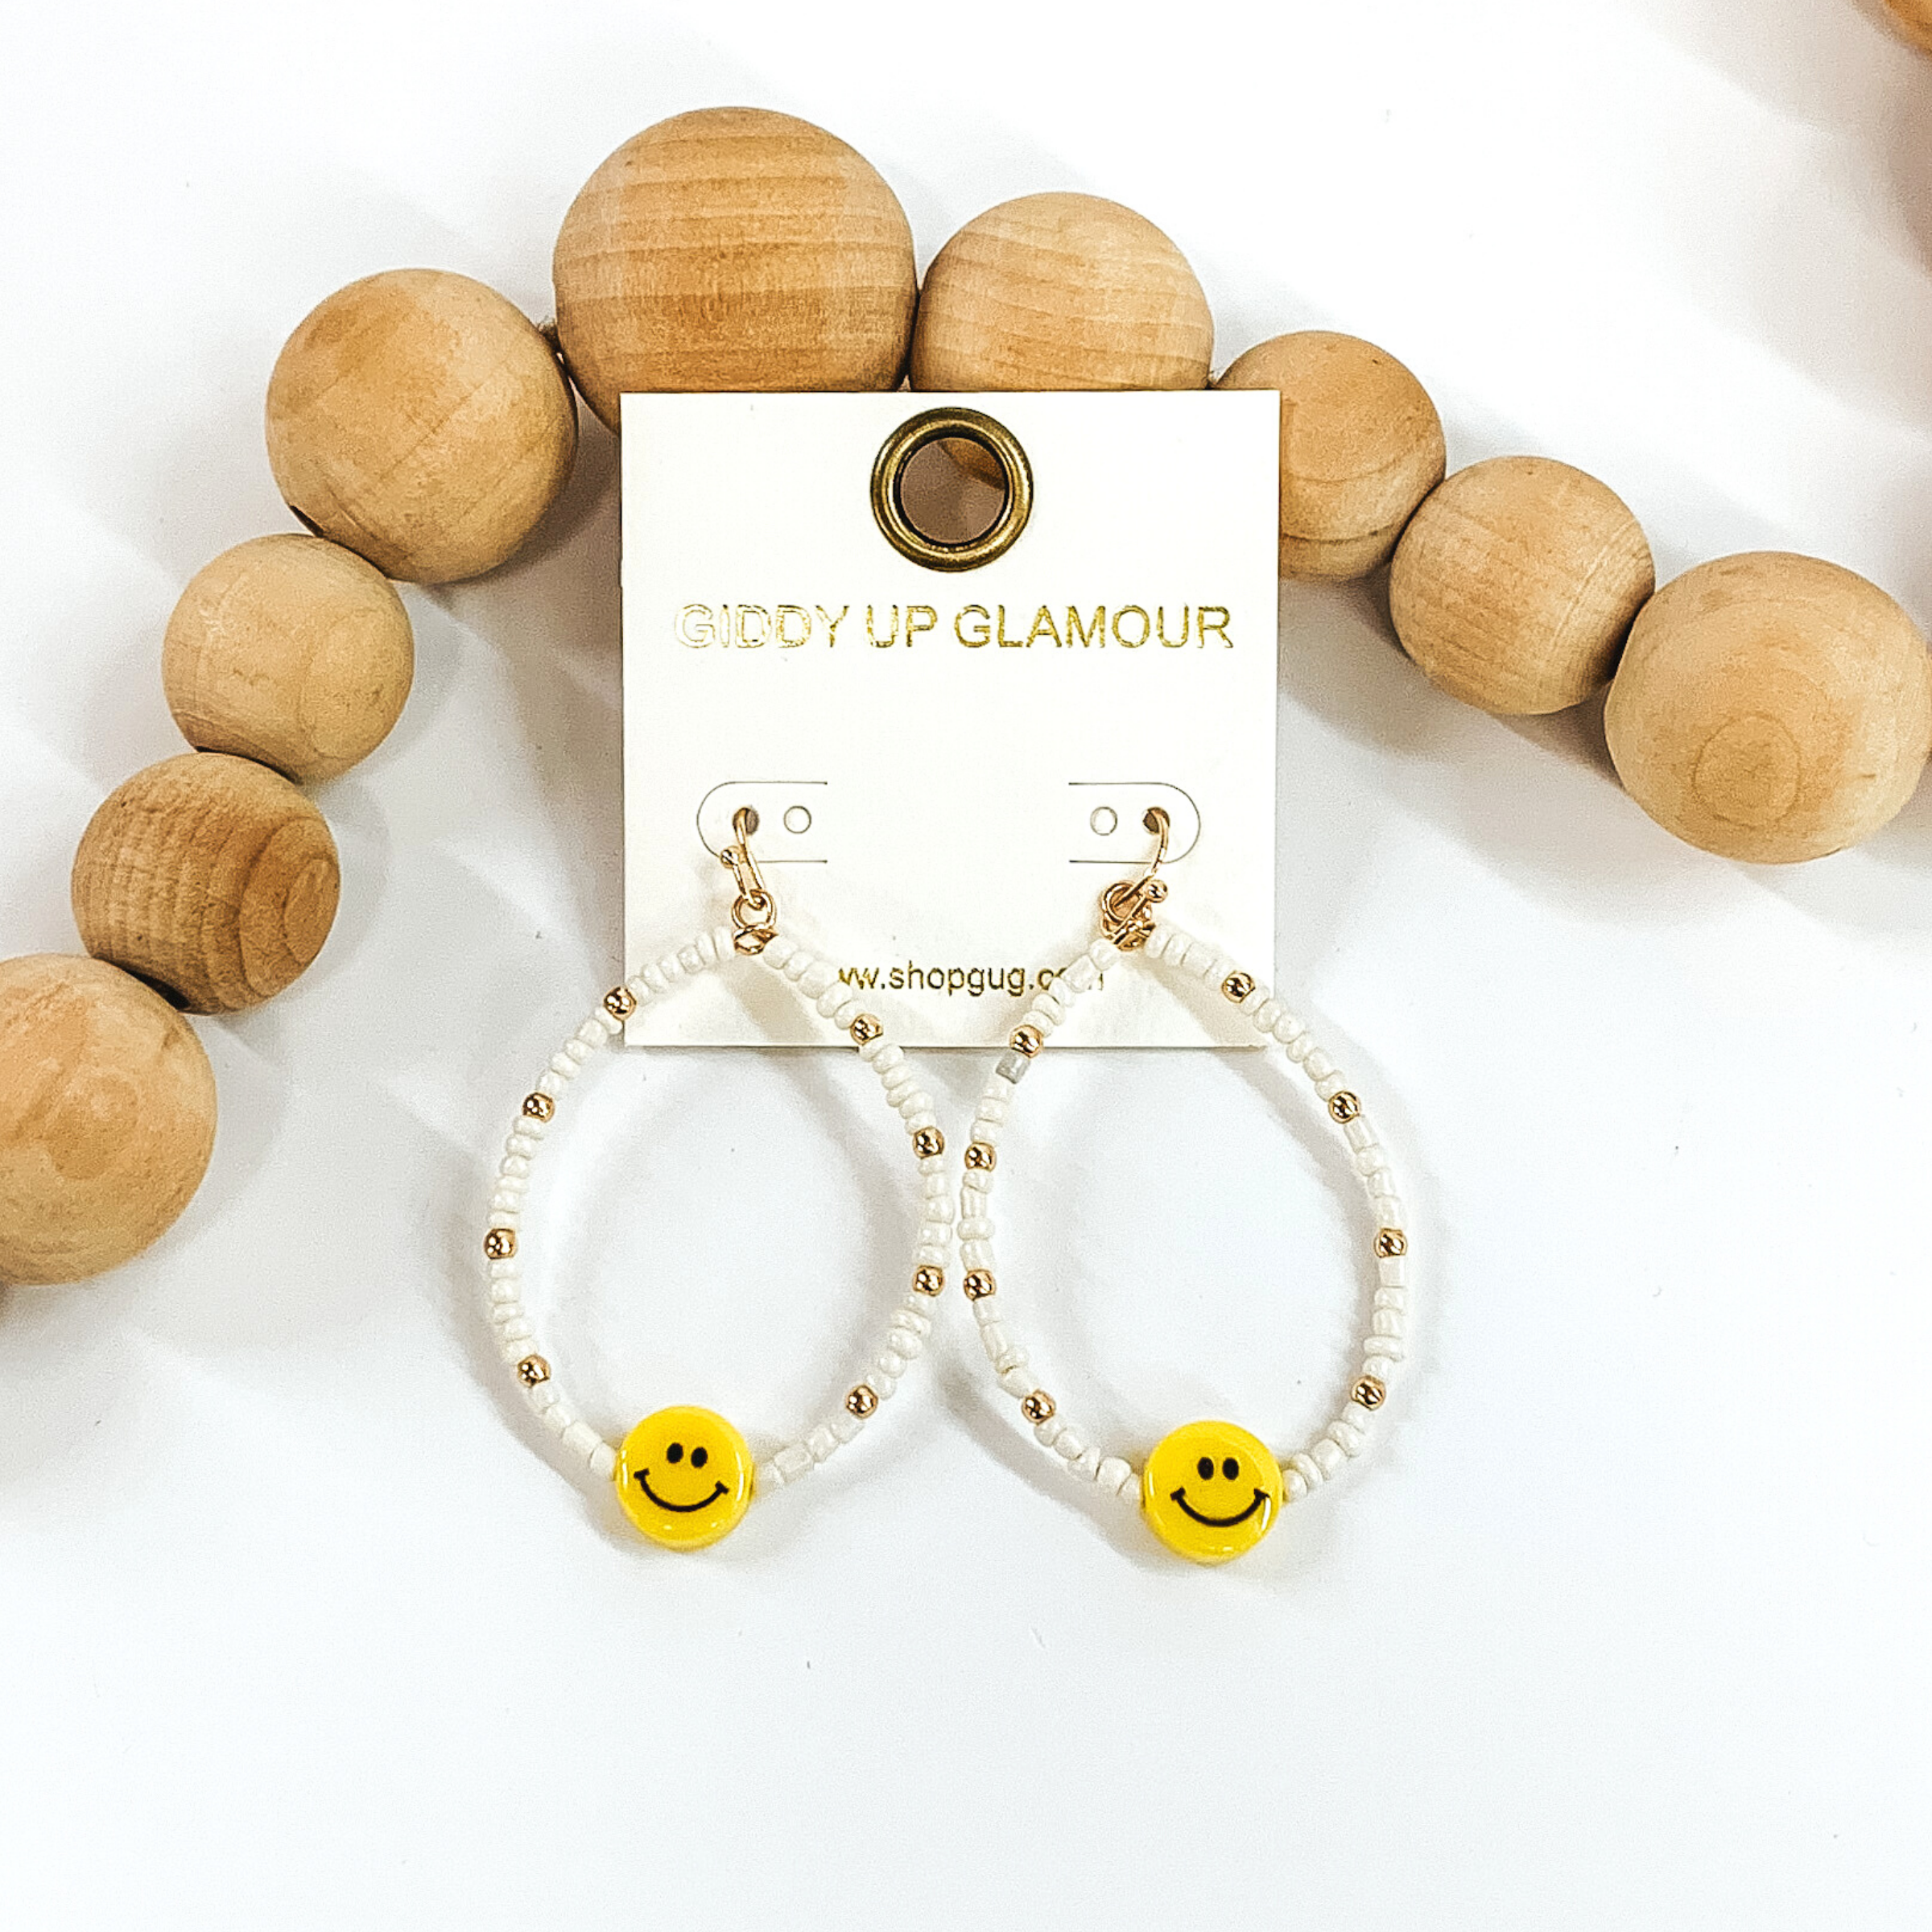 Hanging teardrop earrings with hanging yellow smiley faces. These earrings are covered in white beads with gold spacers. These earrings are pictured laying next to some tan beads on a white background.